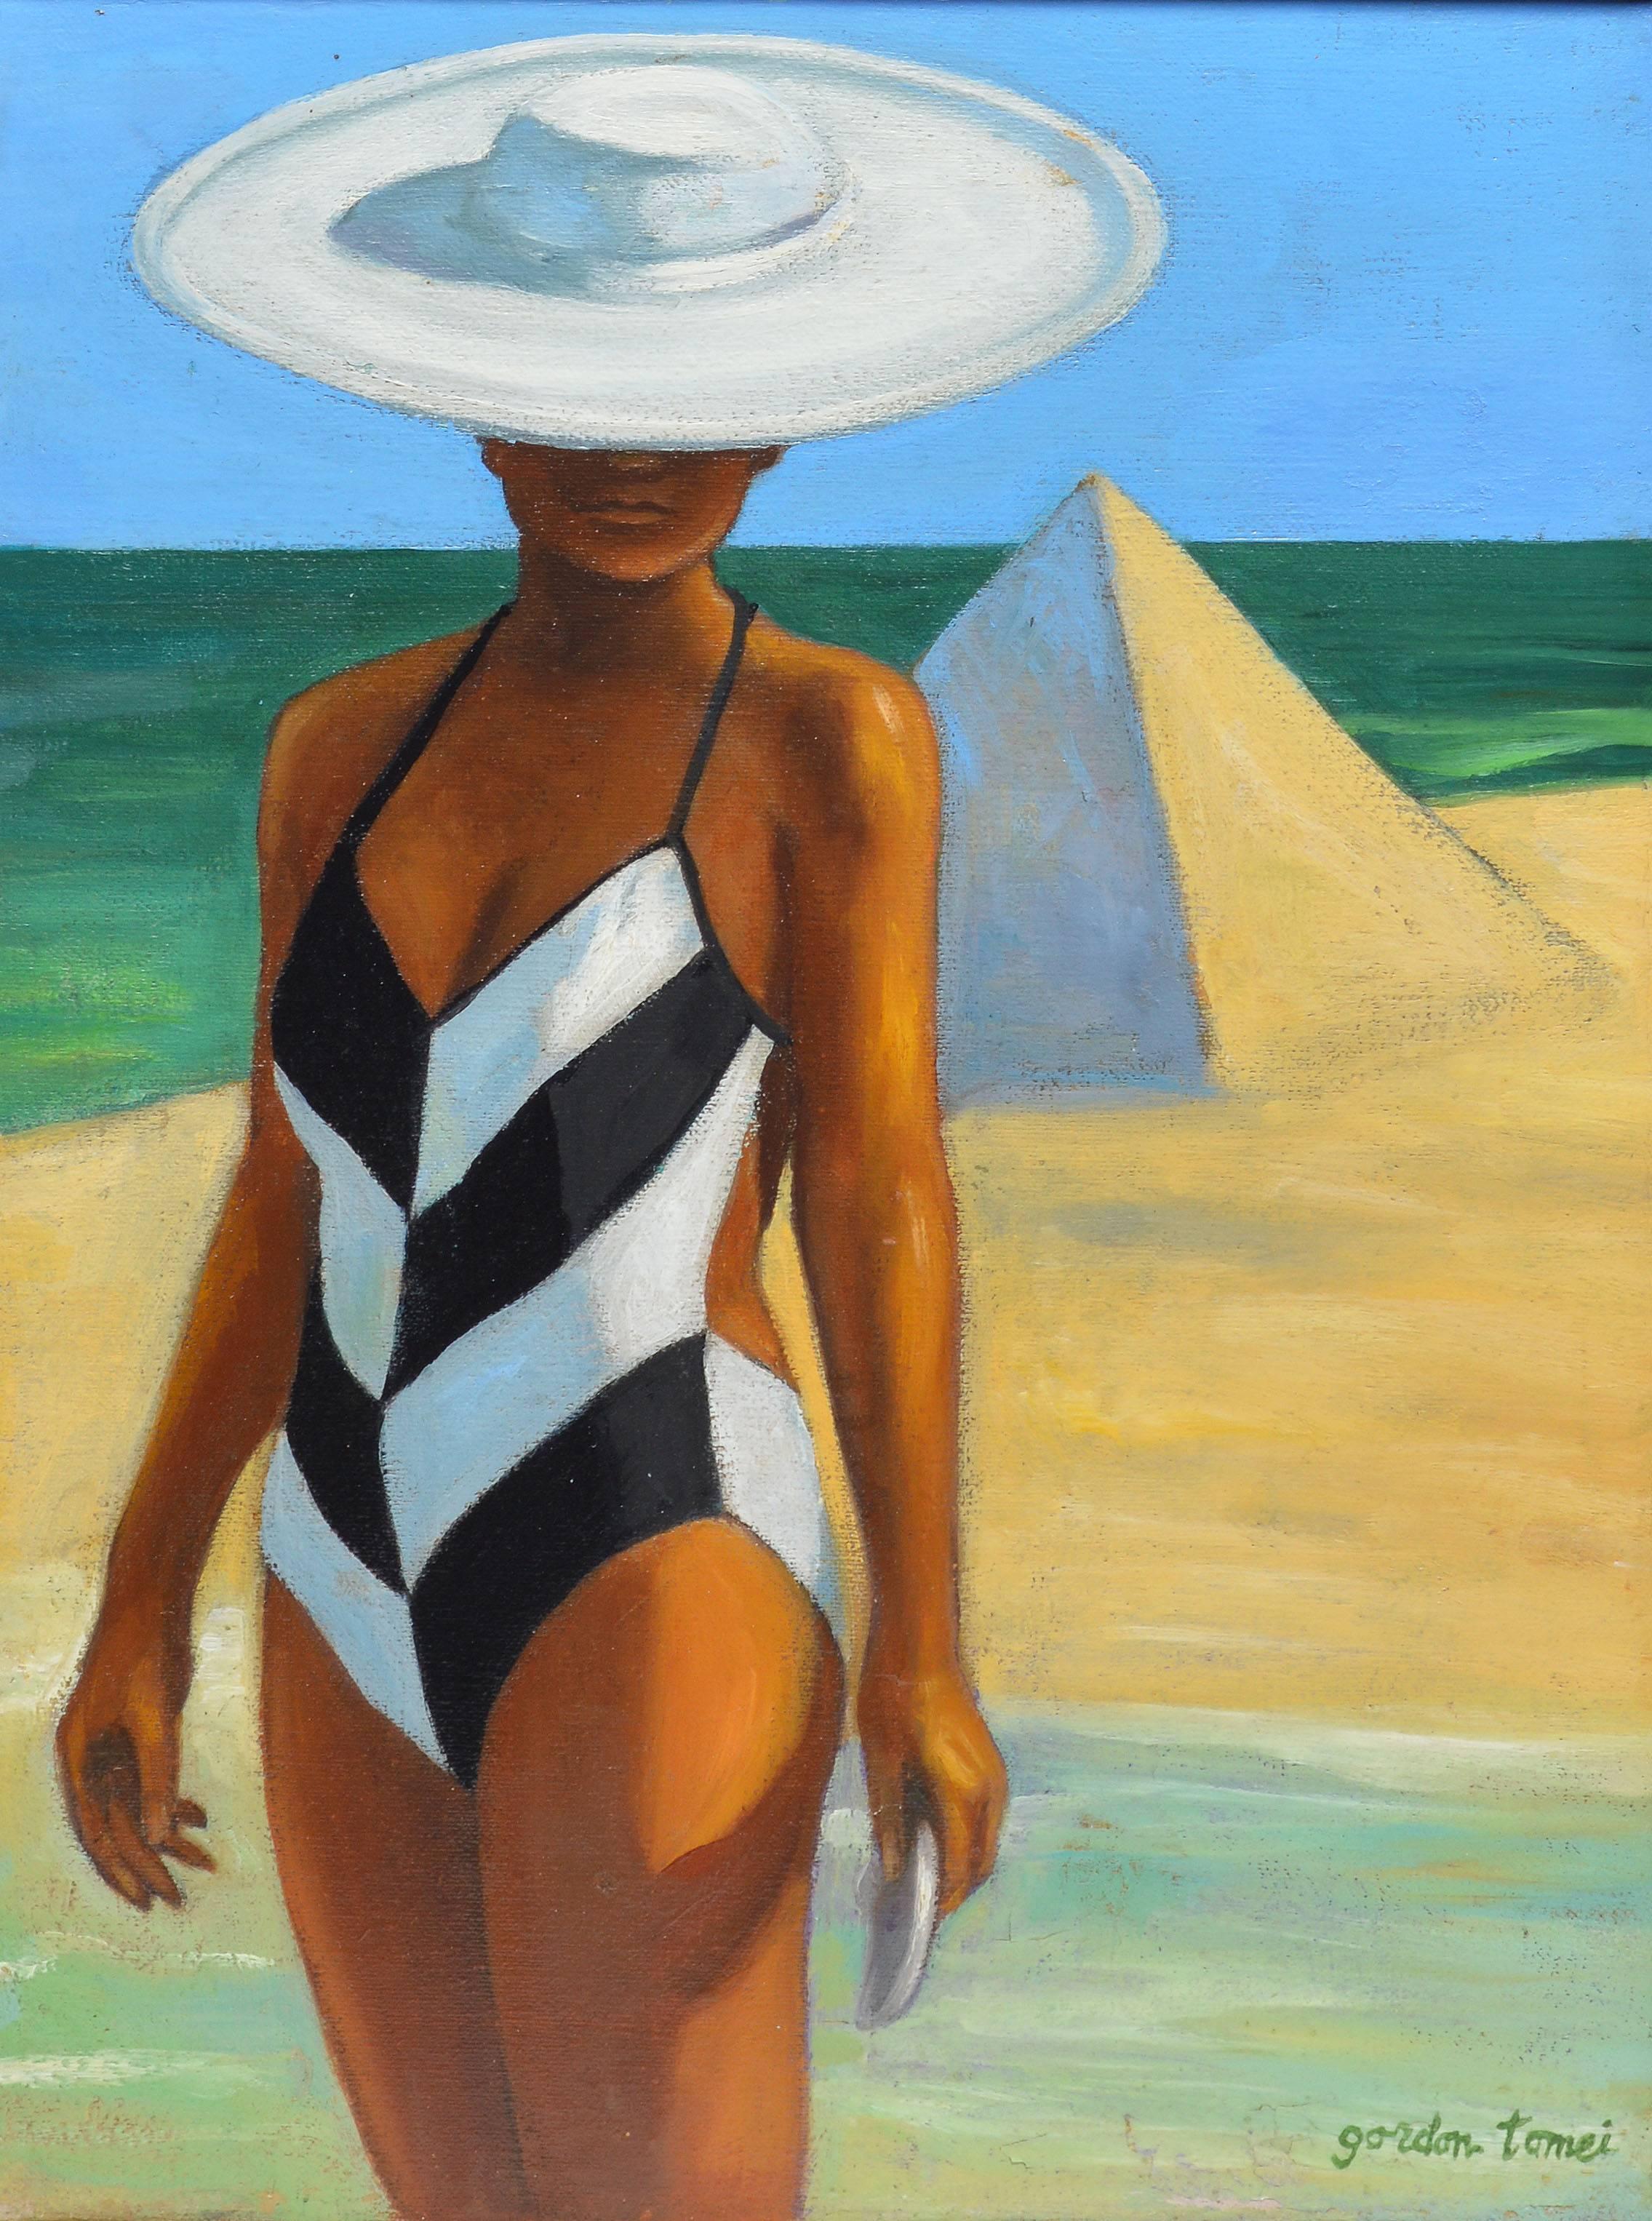 Modernist beach view with a figure and pyramid.  Oil on canvas, circa 1960.  Signed lower right, 